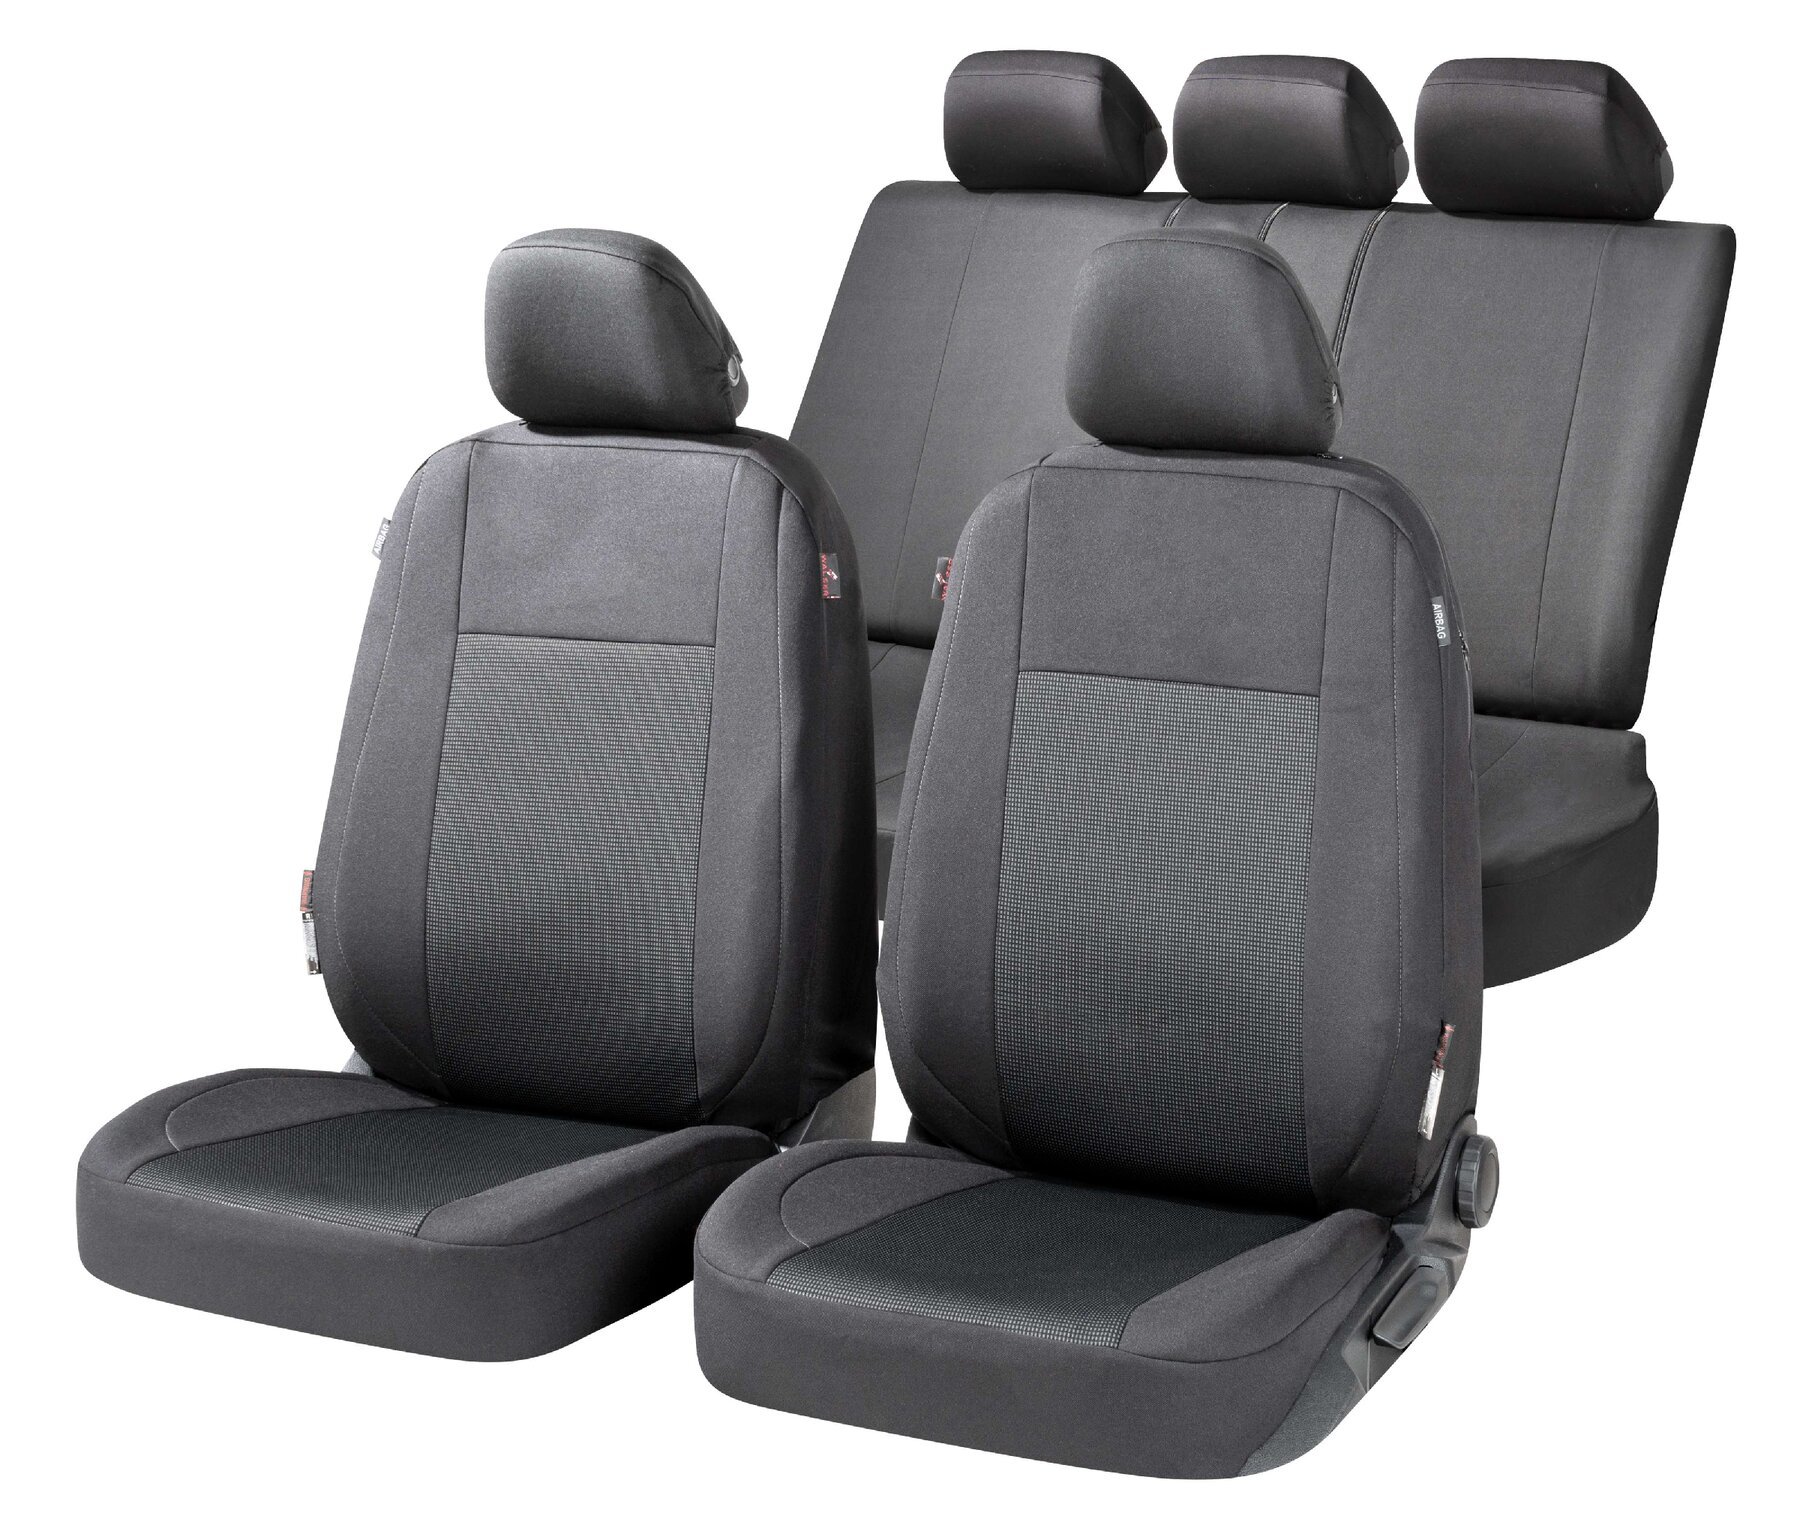 ZIPP IT Premium Car seat covers Ardwell complete set with zip-system black/grey